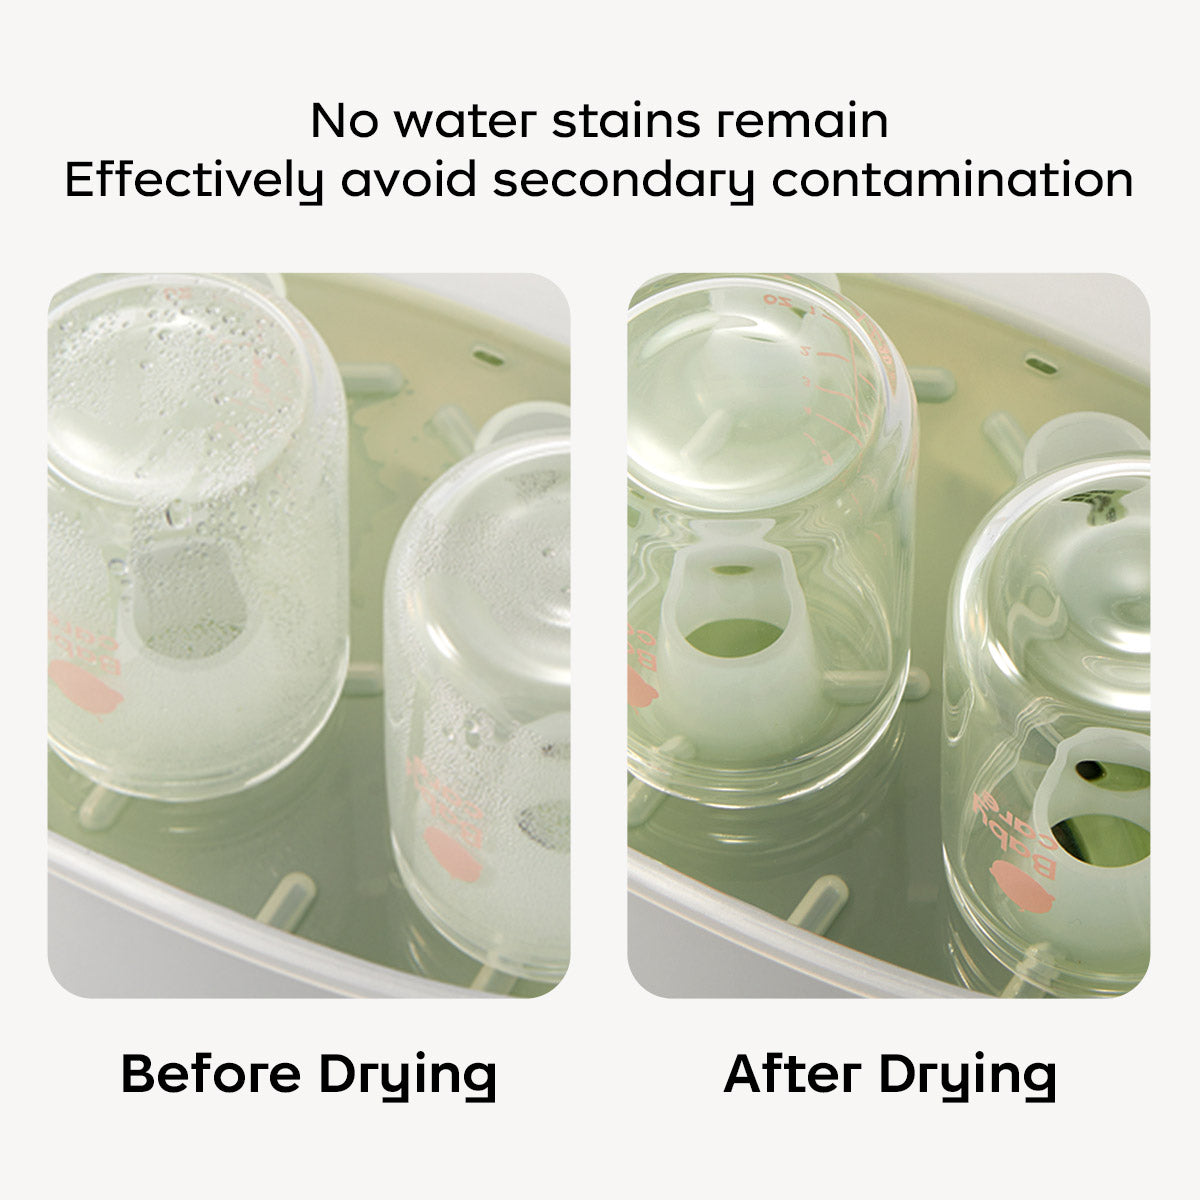 Can You Sterilize Breast Pump Parts In A Bottle Sterilizer or Dishwasher?